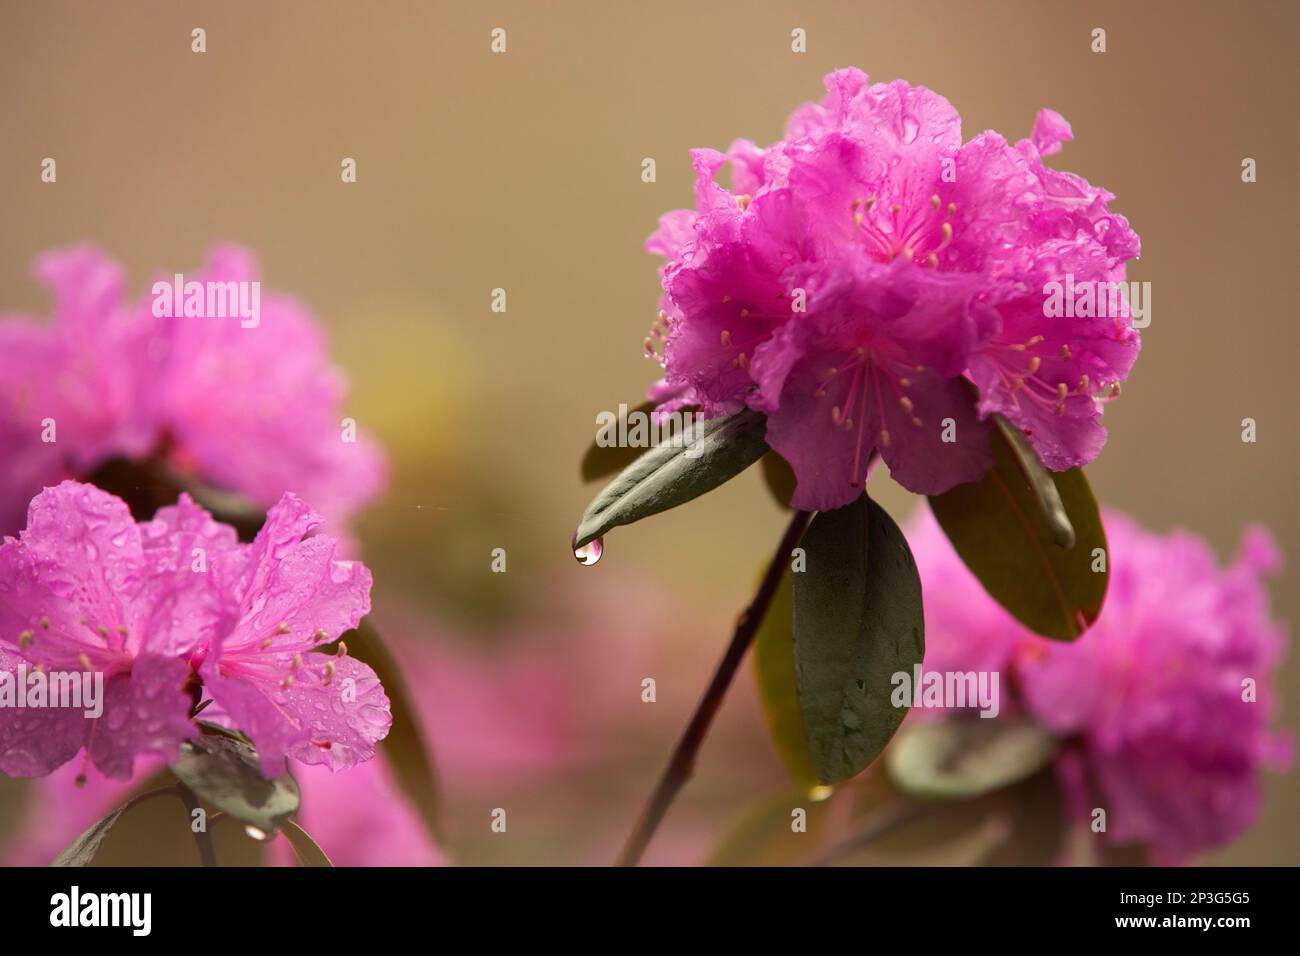 A pink Rhododendron blossom after a rainstorm. Stock Photo